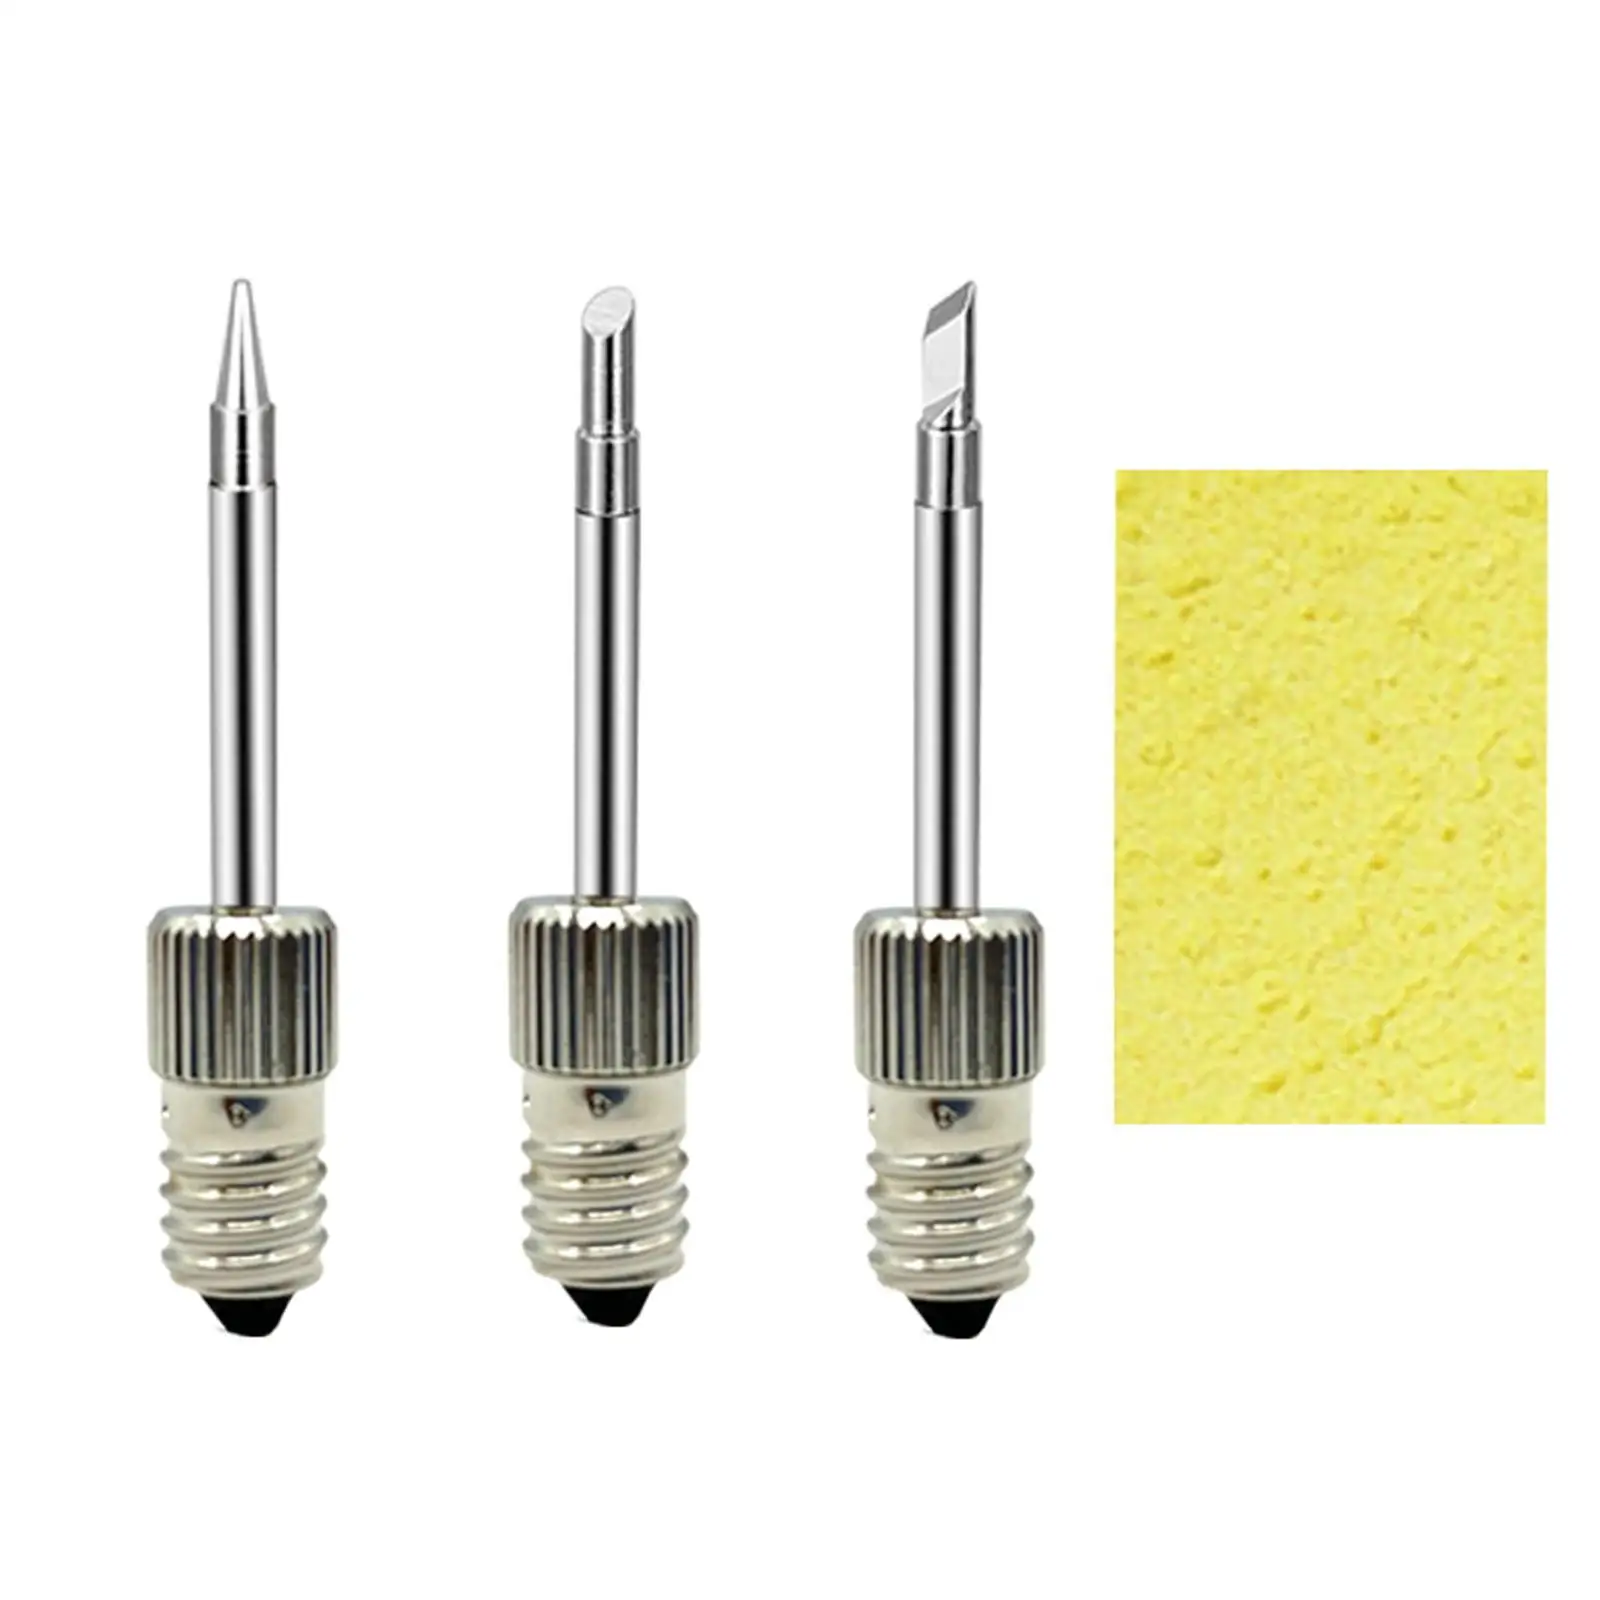 3 Pieces Soldering Tips Welding Soldering Tips for E10 Interface Soldering